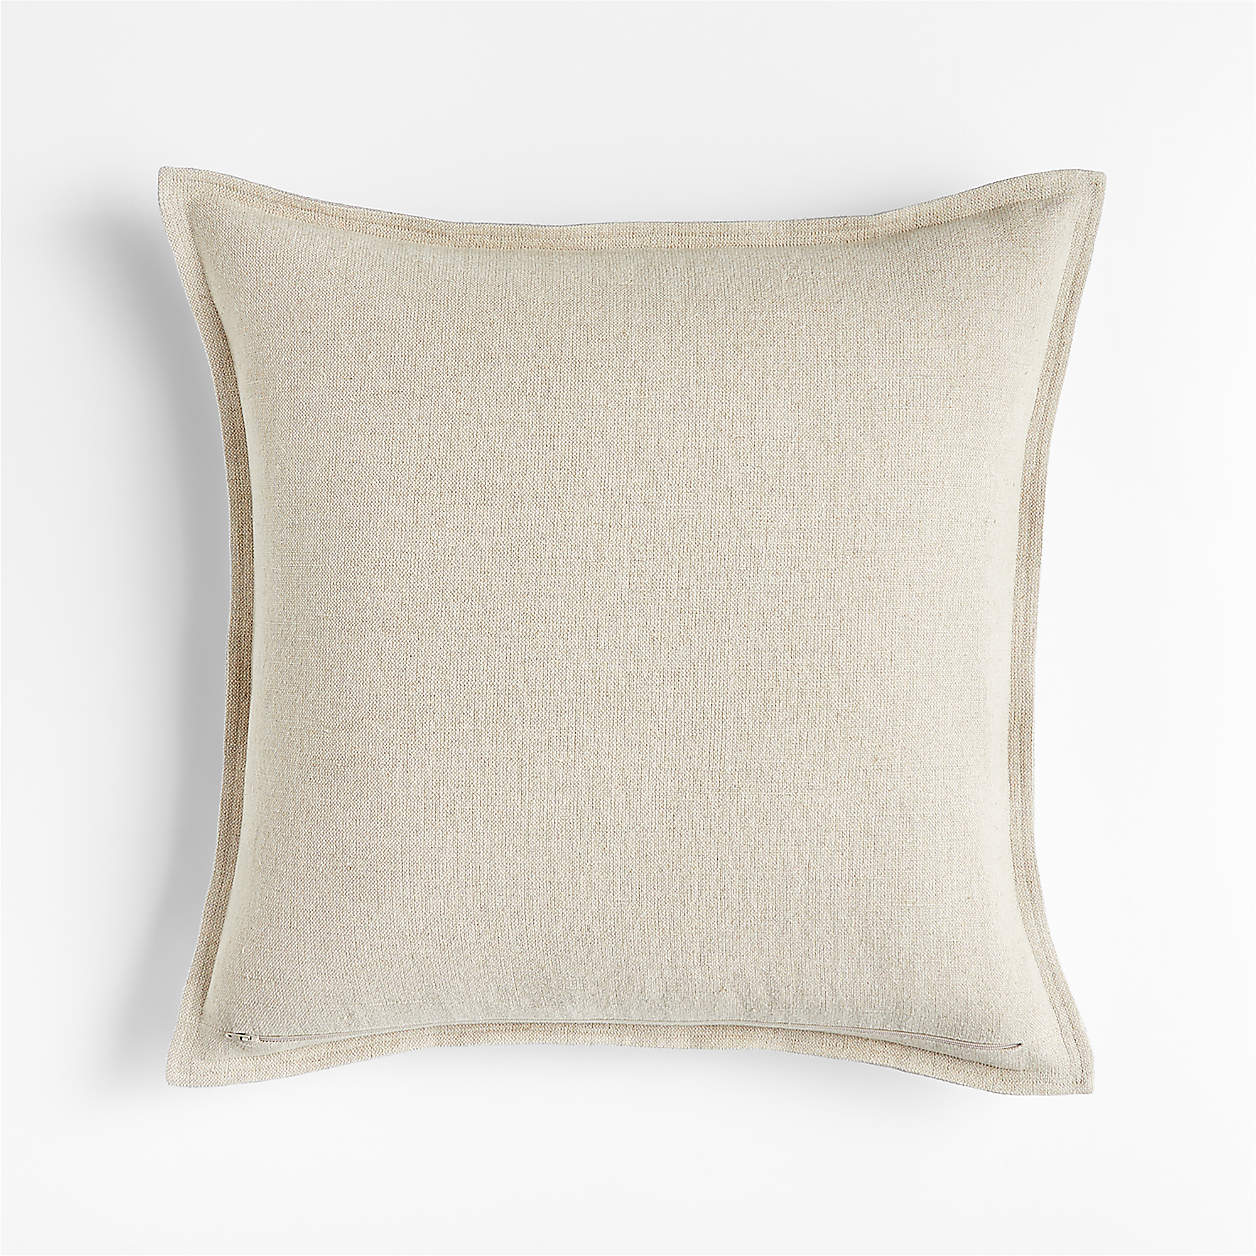 Organic Laundered Linen 18"x12" White Throw Pillow Cover